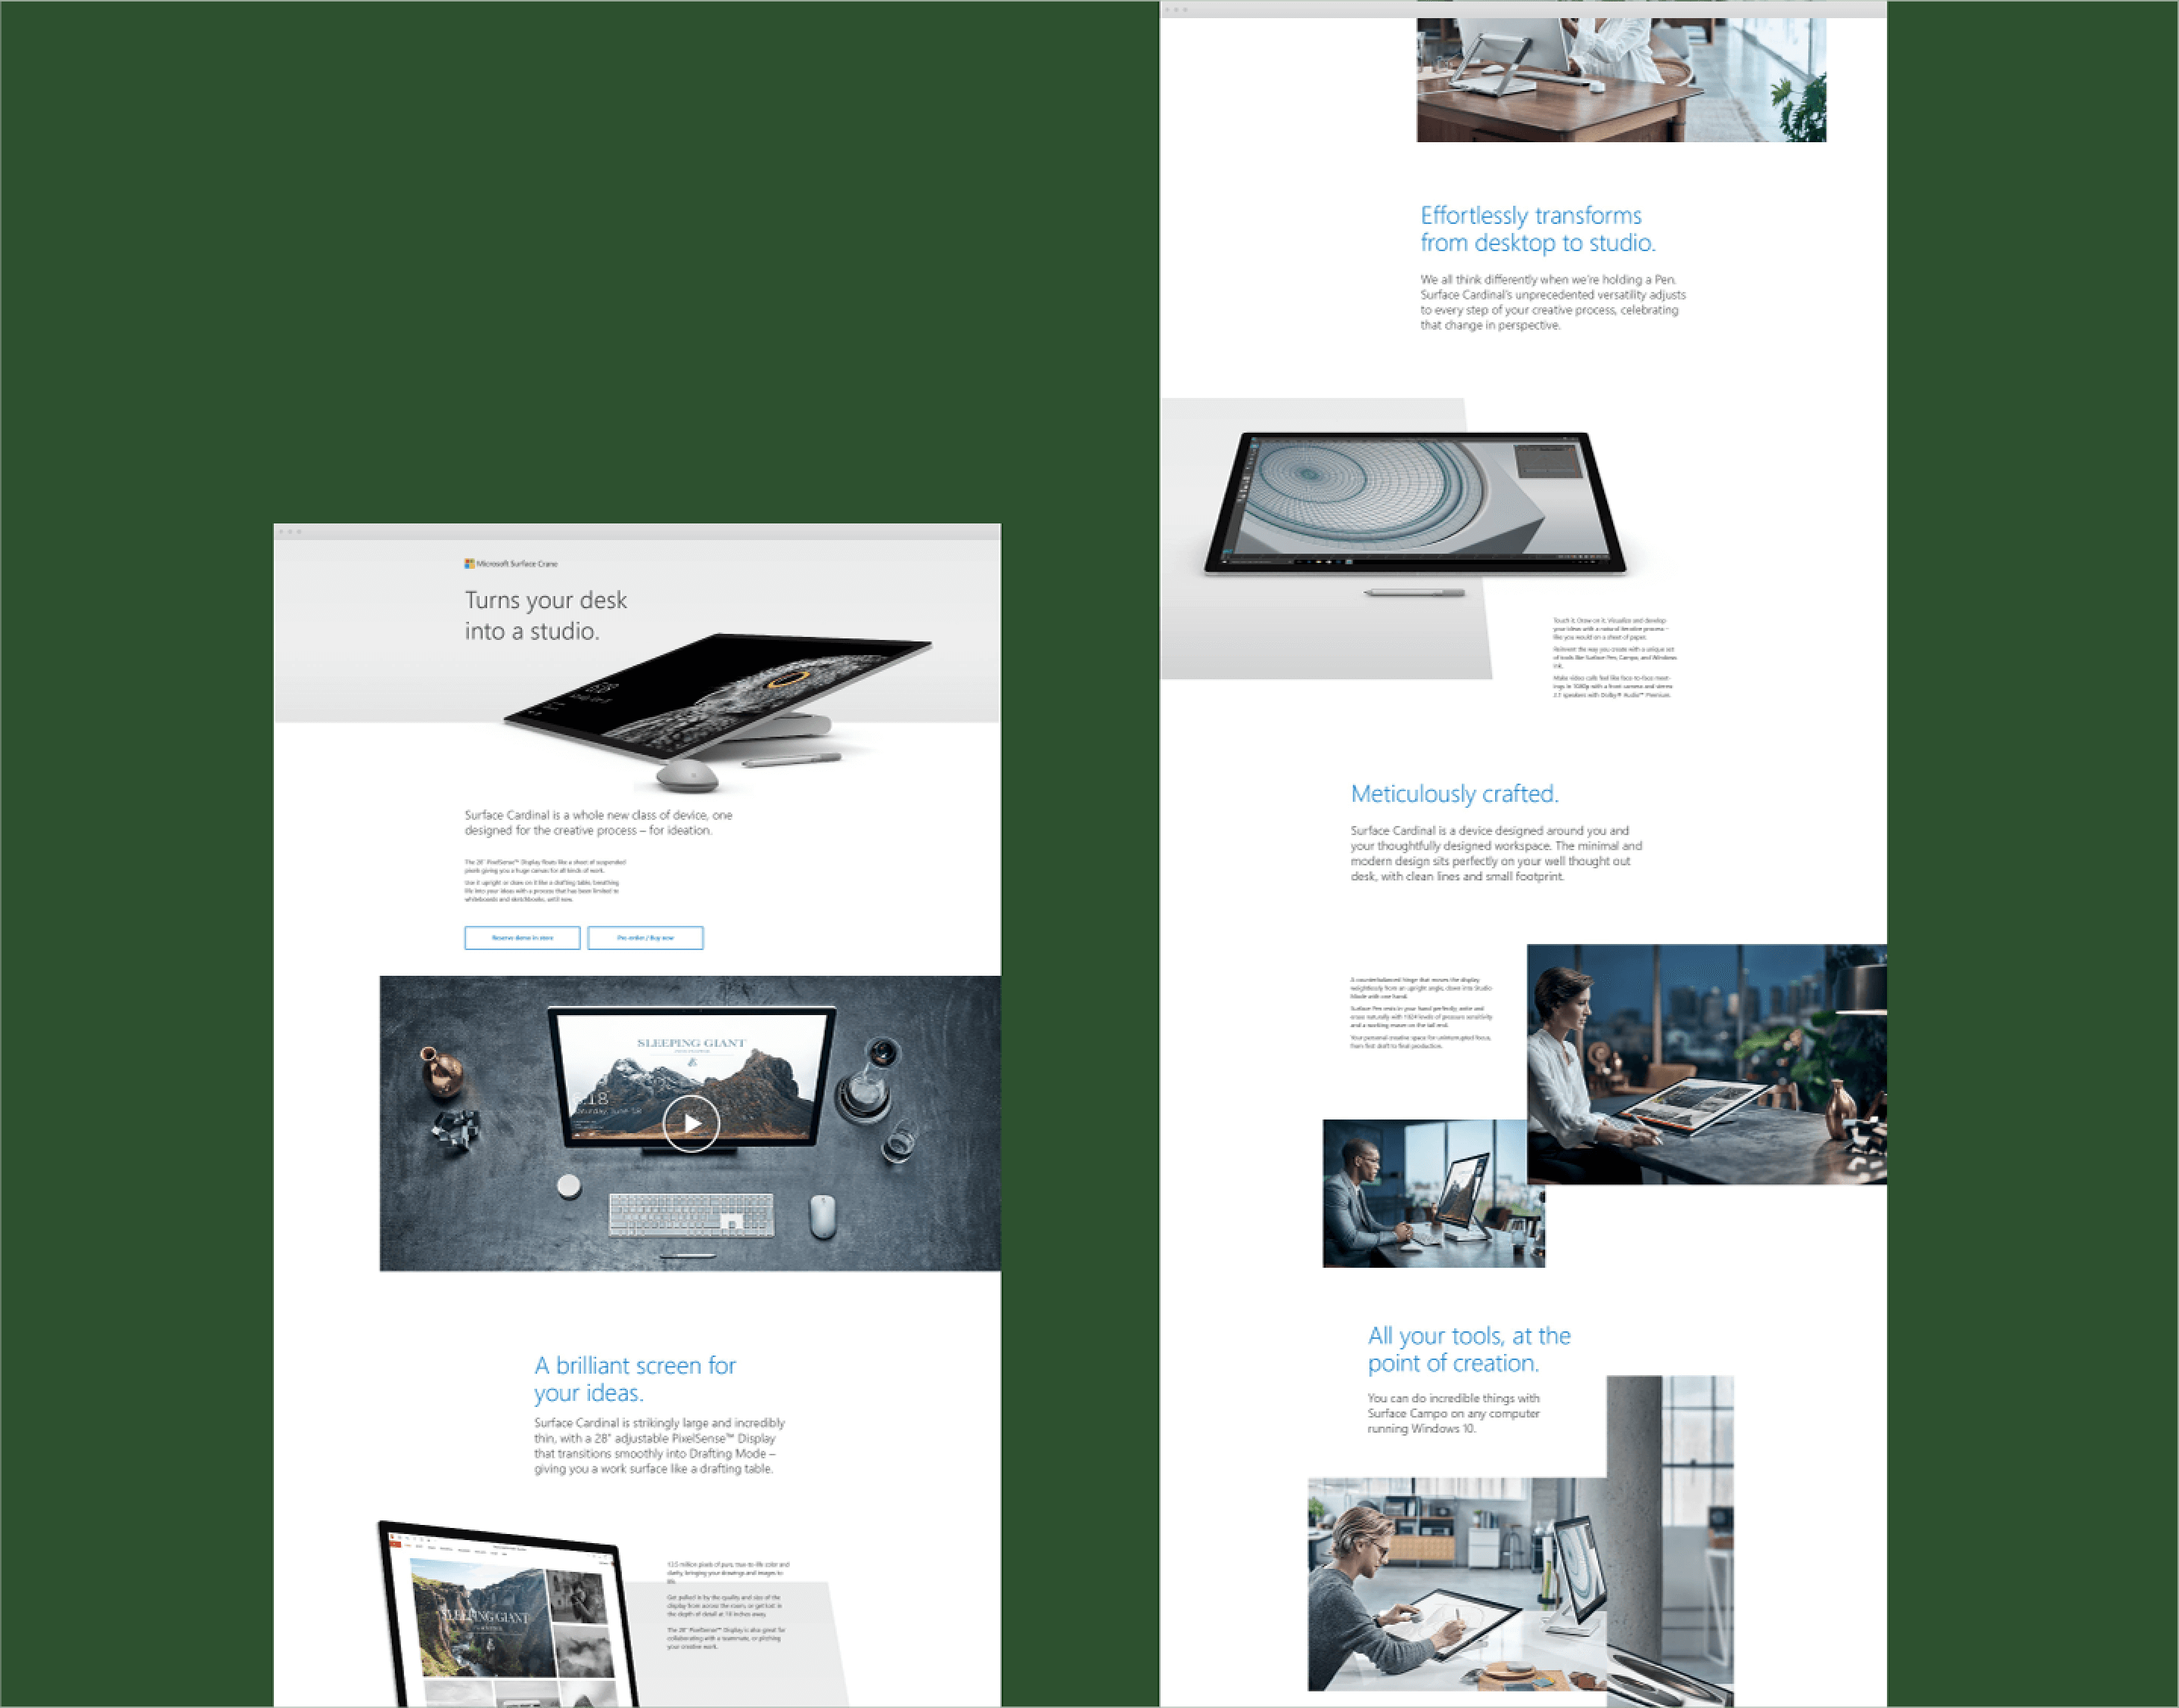 Surface studio product page on desktop with a lot of photography and simple layout